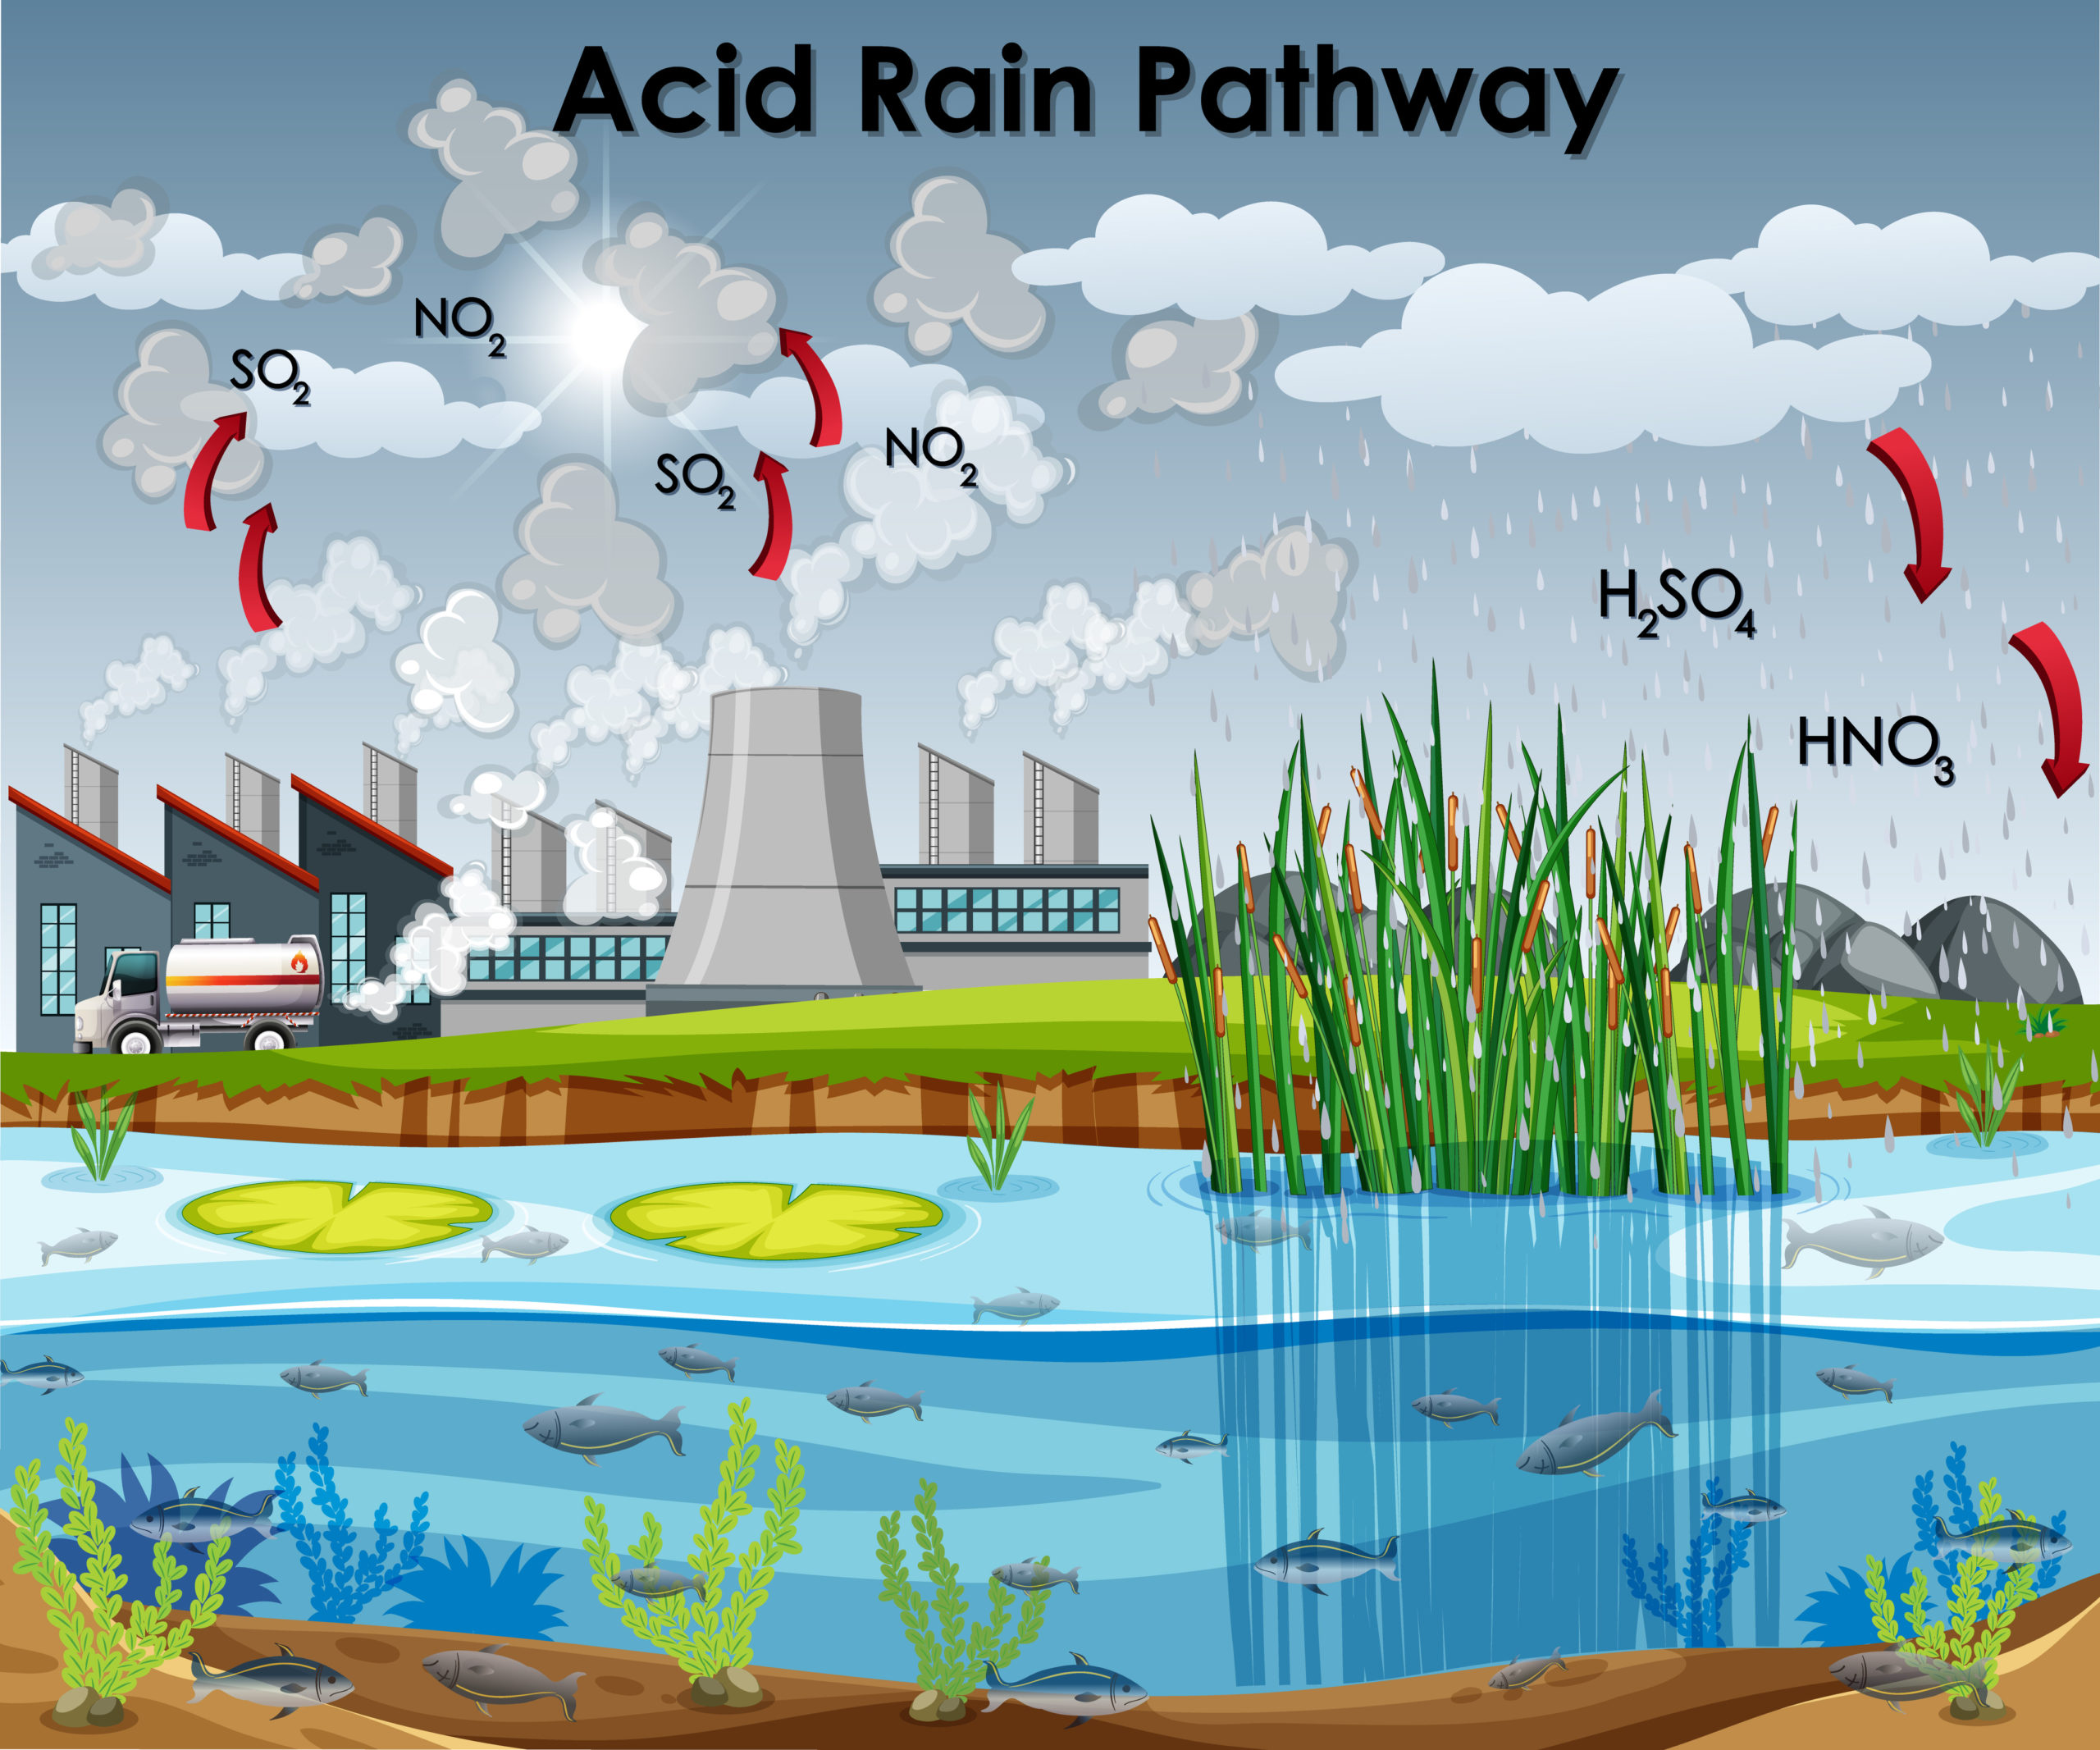 Acid Rain pathway diagram with water and factory illustration